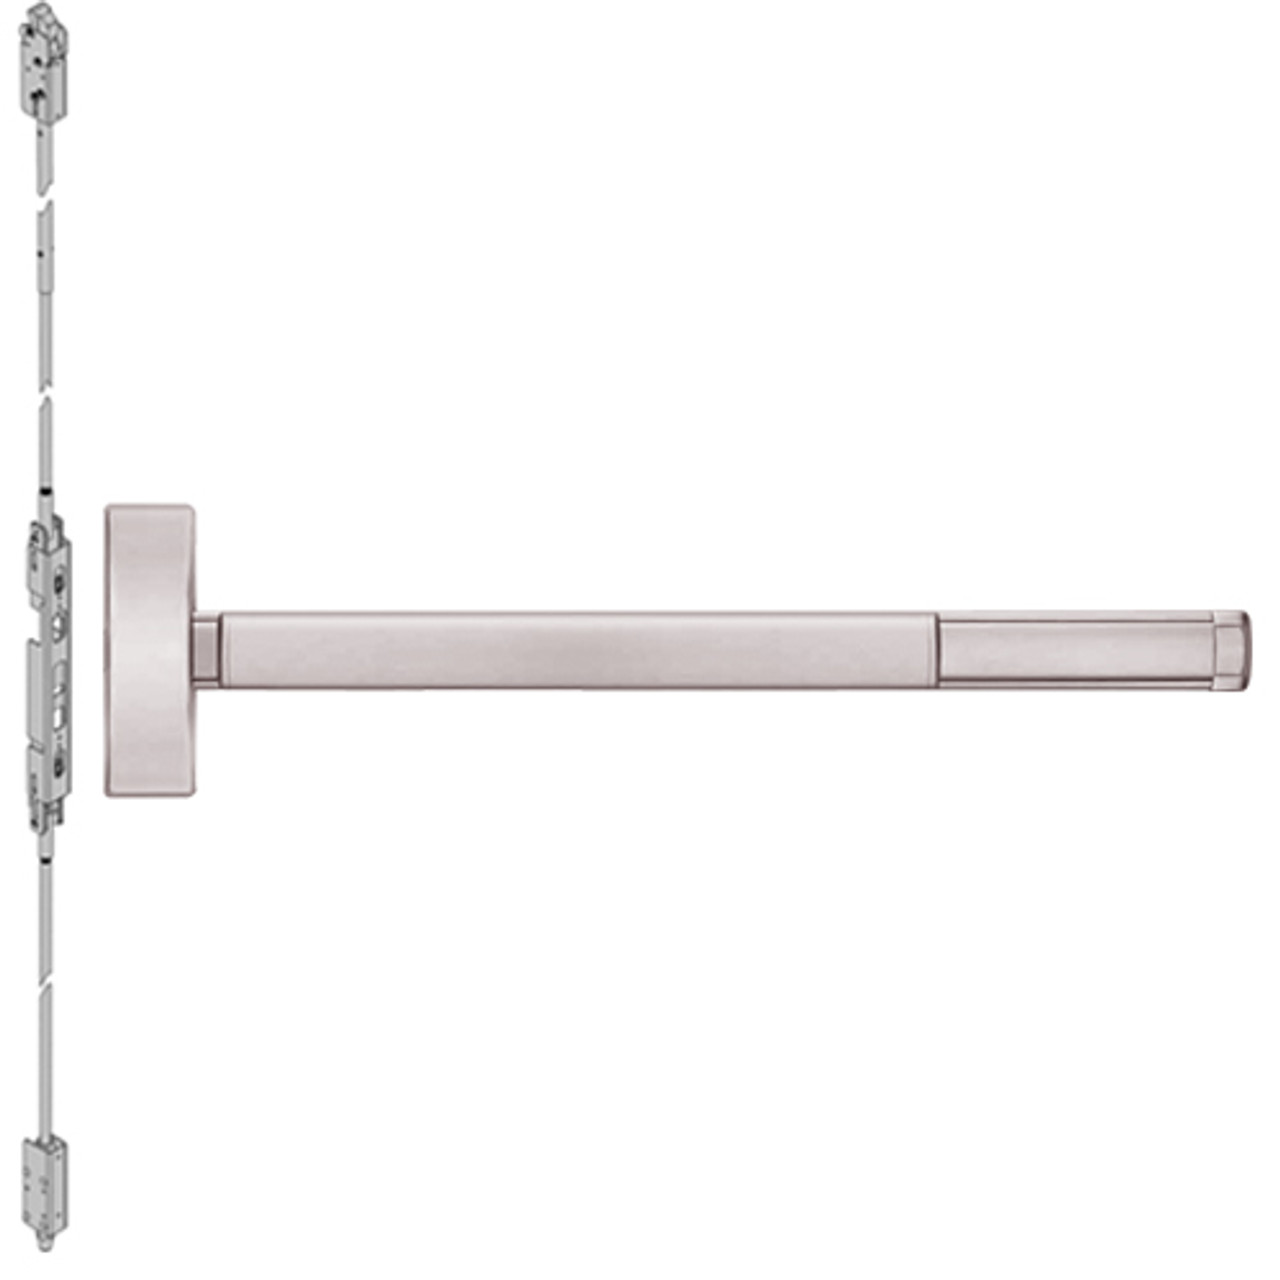 DE2801-628-48 PHI 2800 Series Concealed Vertical Rod Exit Device with Delayed Egress Prepped for Cover Plate in Satin Aluminum Finish